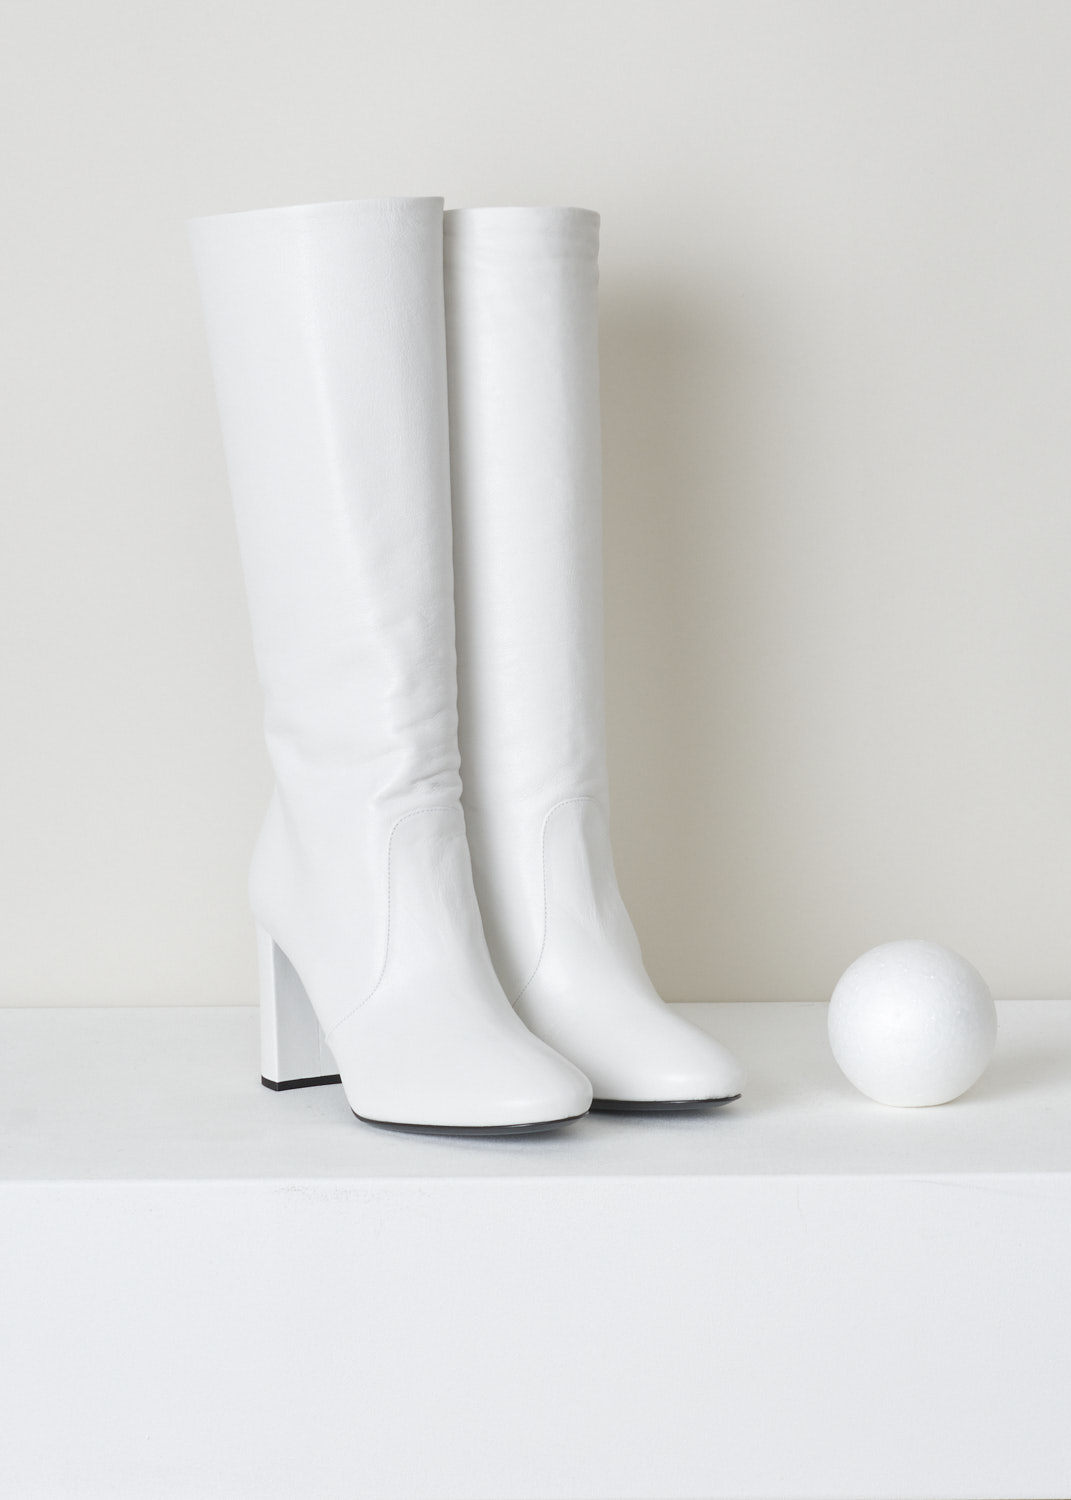 PRADA, WHITE HEELED BOOTS, MADRAS_1W684L_034_BIANCO, White, Front, White leather boots with a heel. These boots hit right below the knee. The toe of these shoes is almond shaped. The closure option on these boots is the zipper on the inside of the leg.

Heel height: 8.5 cm / 3.3 inch  
